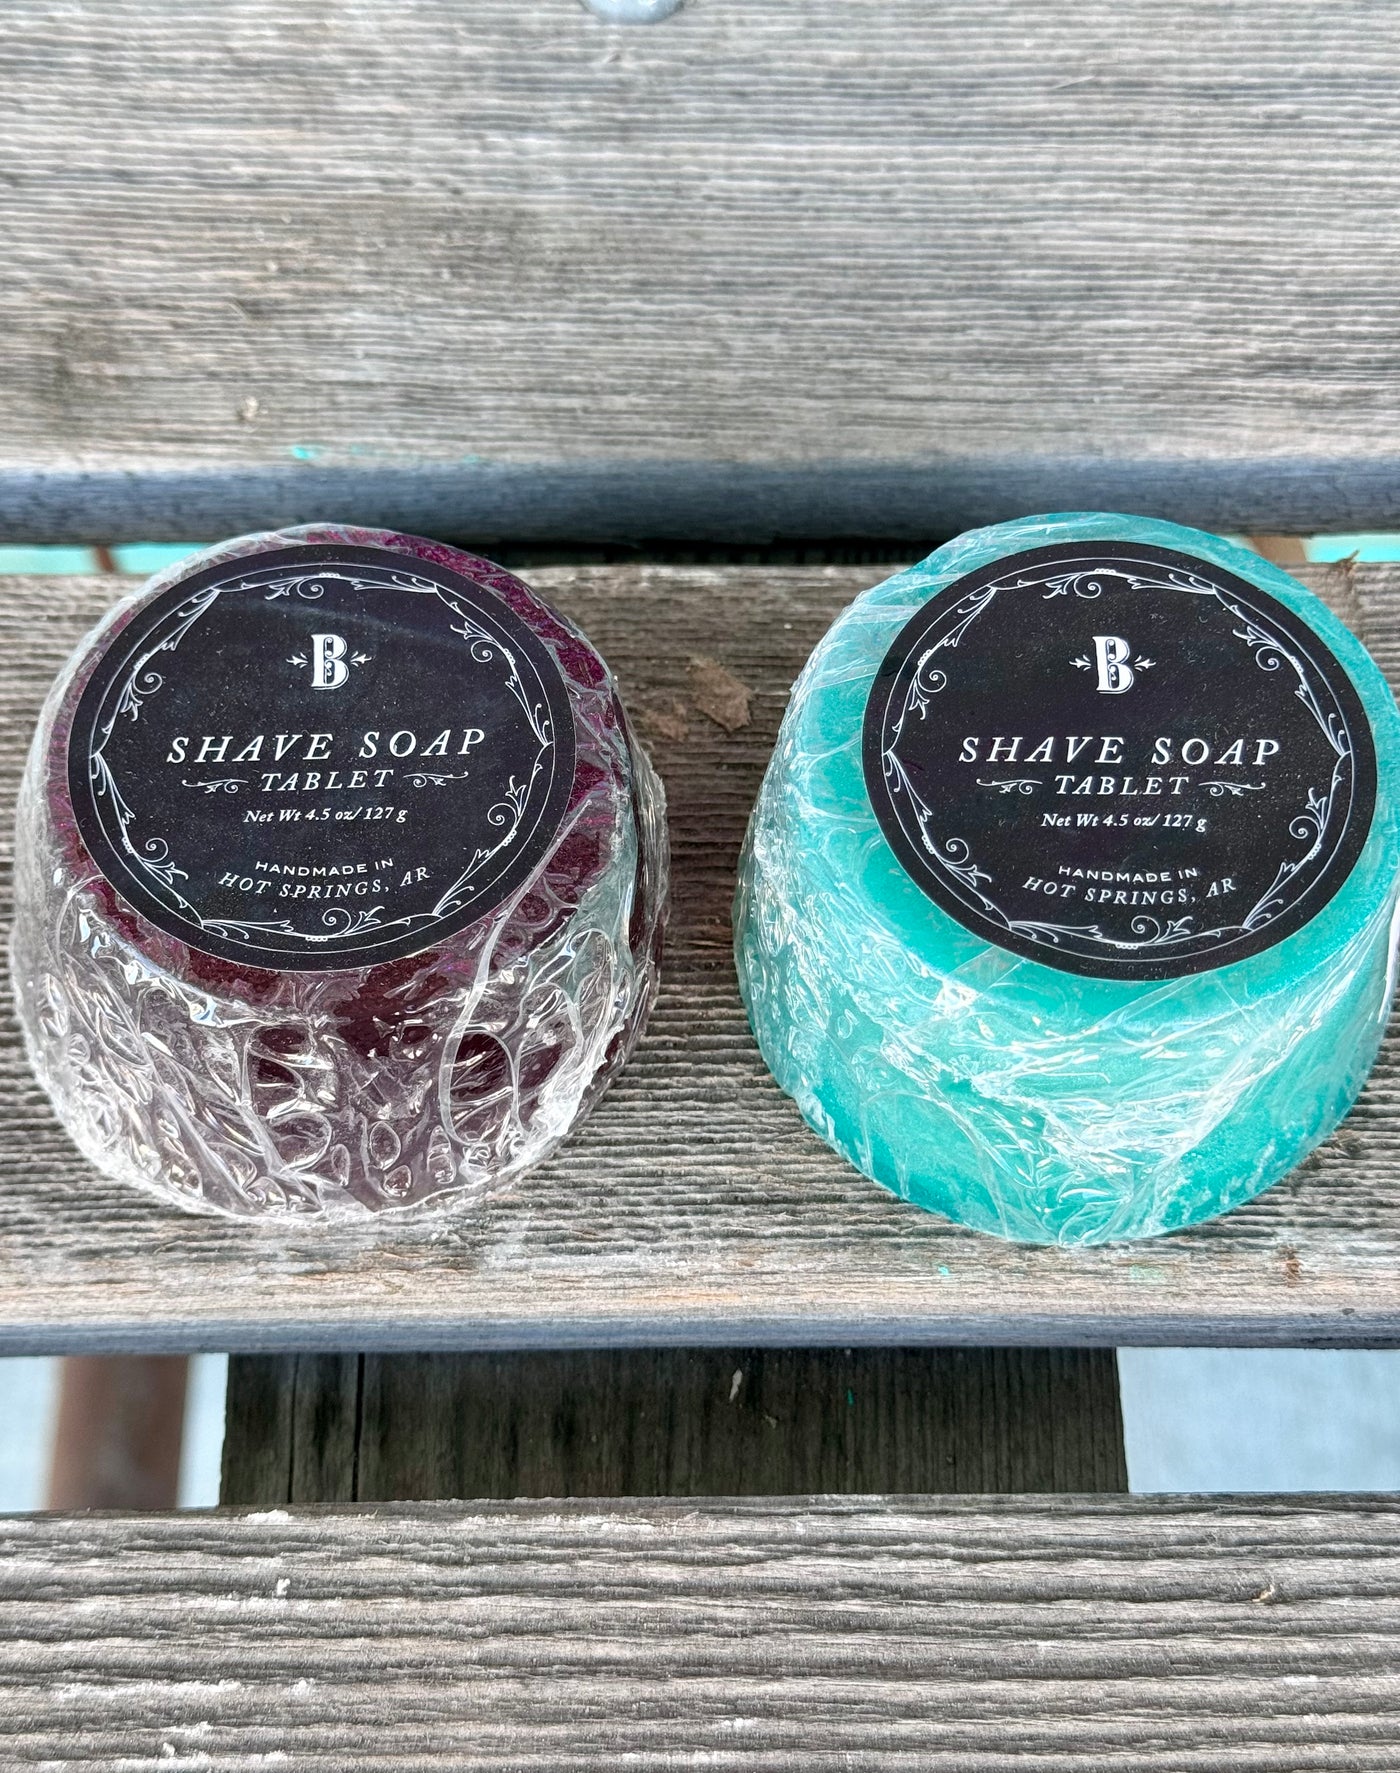 Bathhouse Soapery Shave Soap Tablet-Bath & Beauty-Bathhouse Soapery-Market Street Nest, Fashionable Clothing, Shoes and Home Décor Located in Mabank, TX